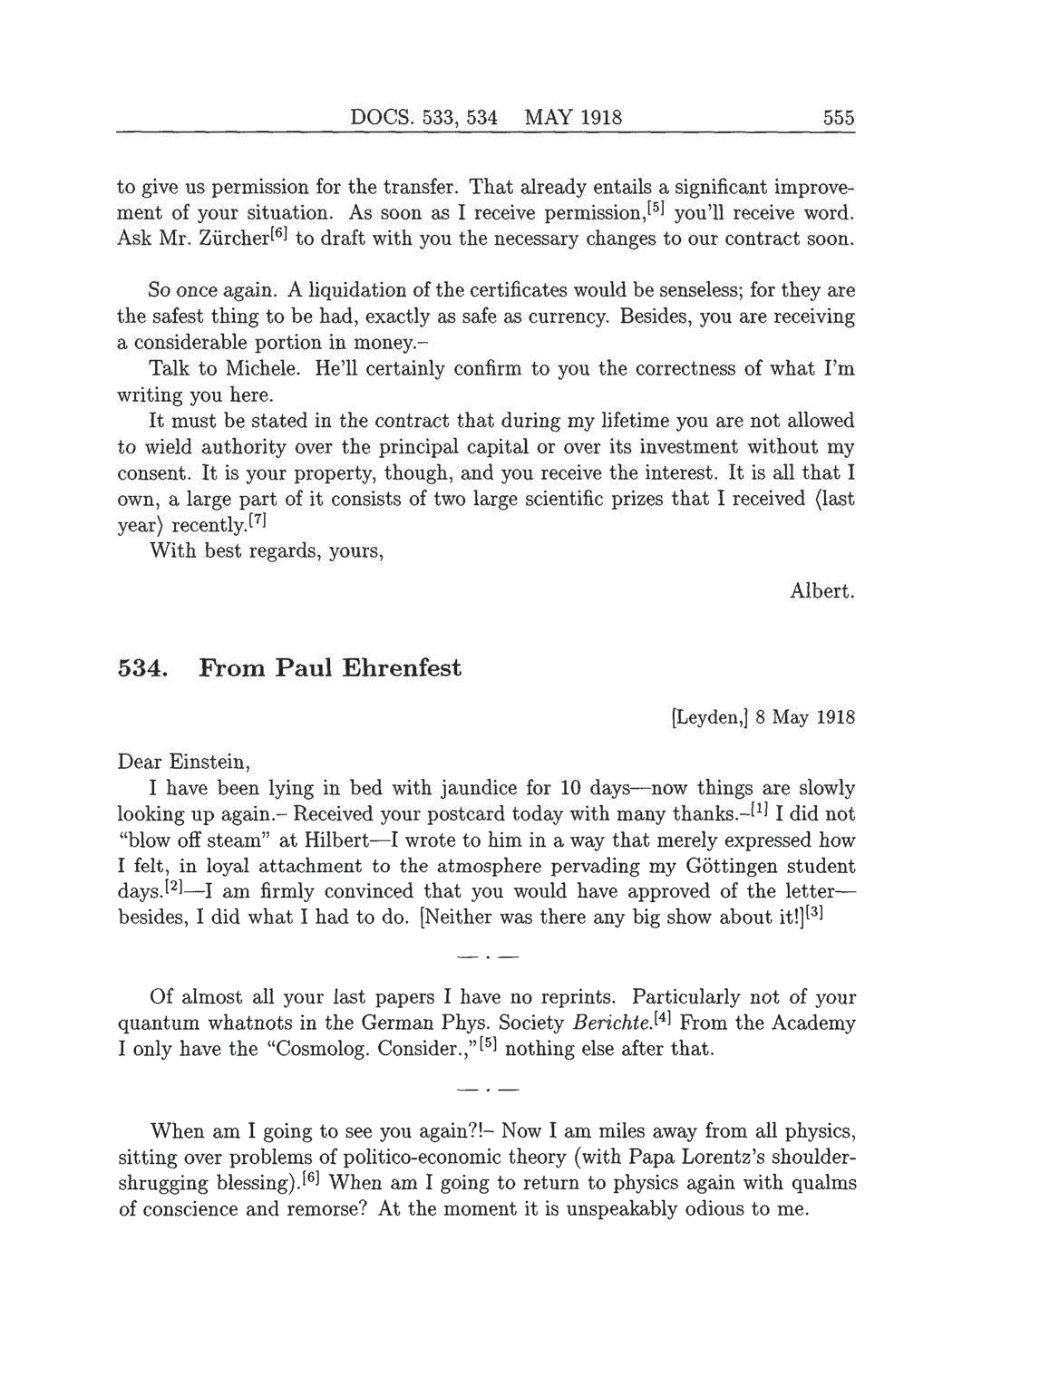 Volume 8: The Berlin Years: Correspondence, 1914-1918 (English translation supplement) page 555